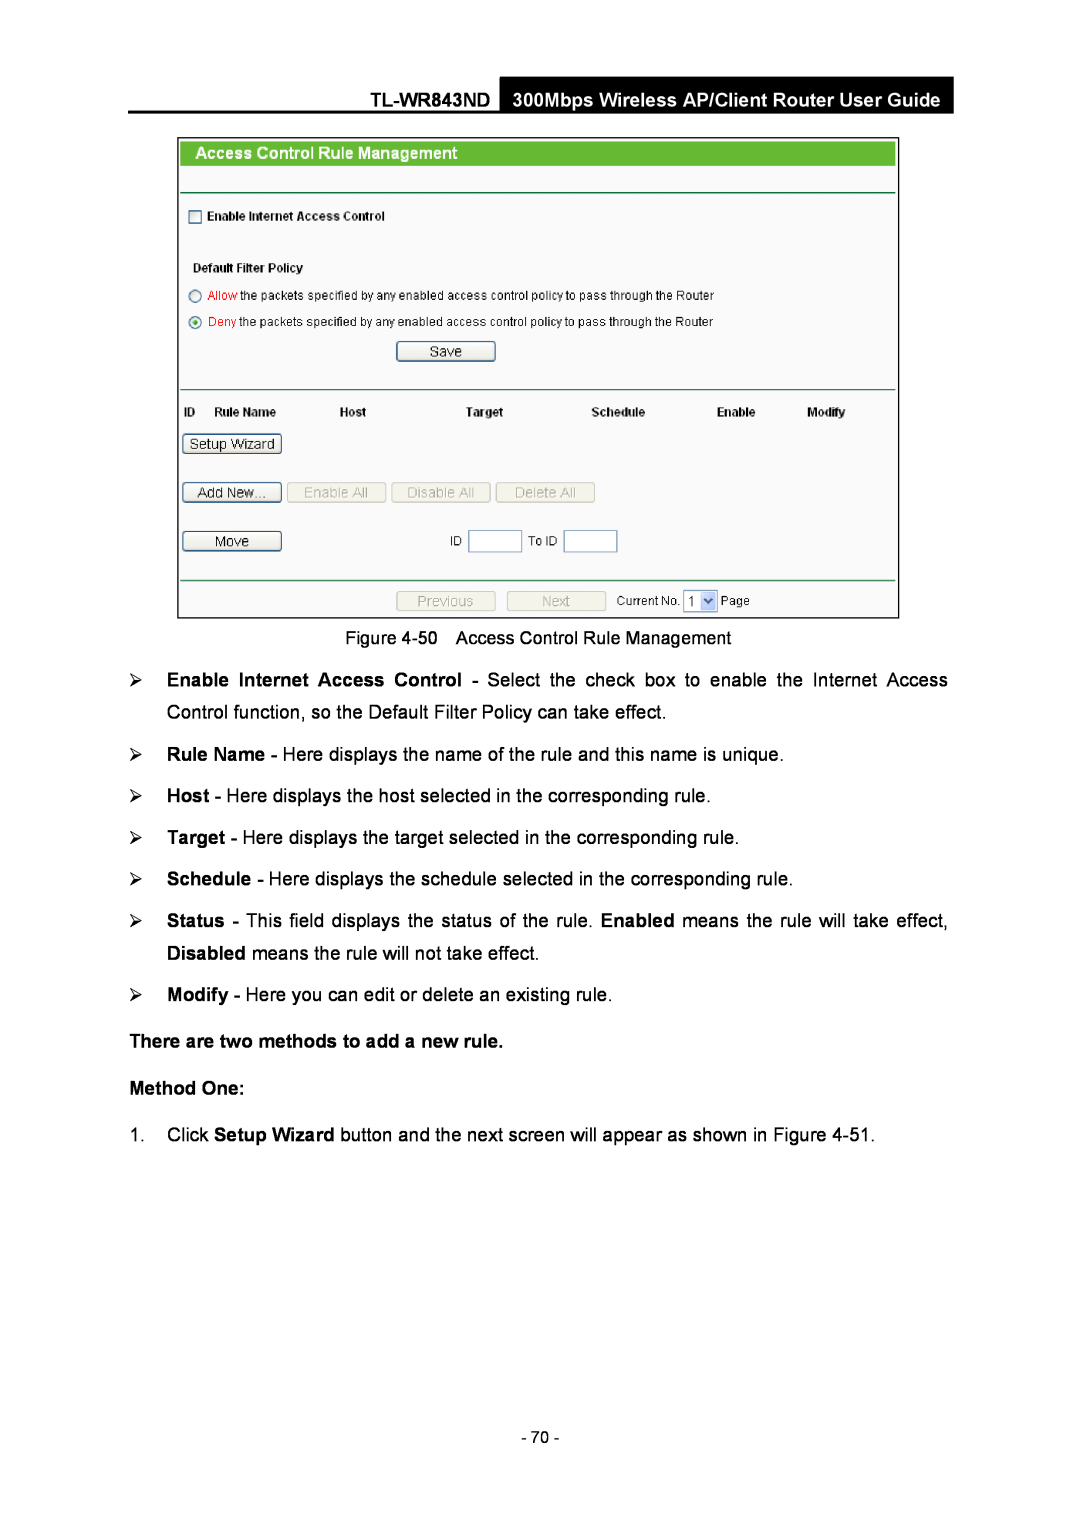 TP-Link TL-WR843ND manual There are two methods to add a new rule Method One 